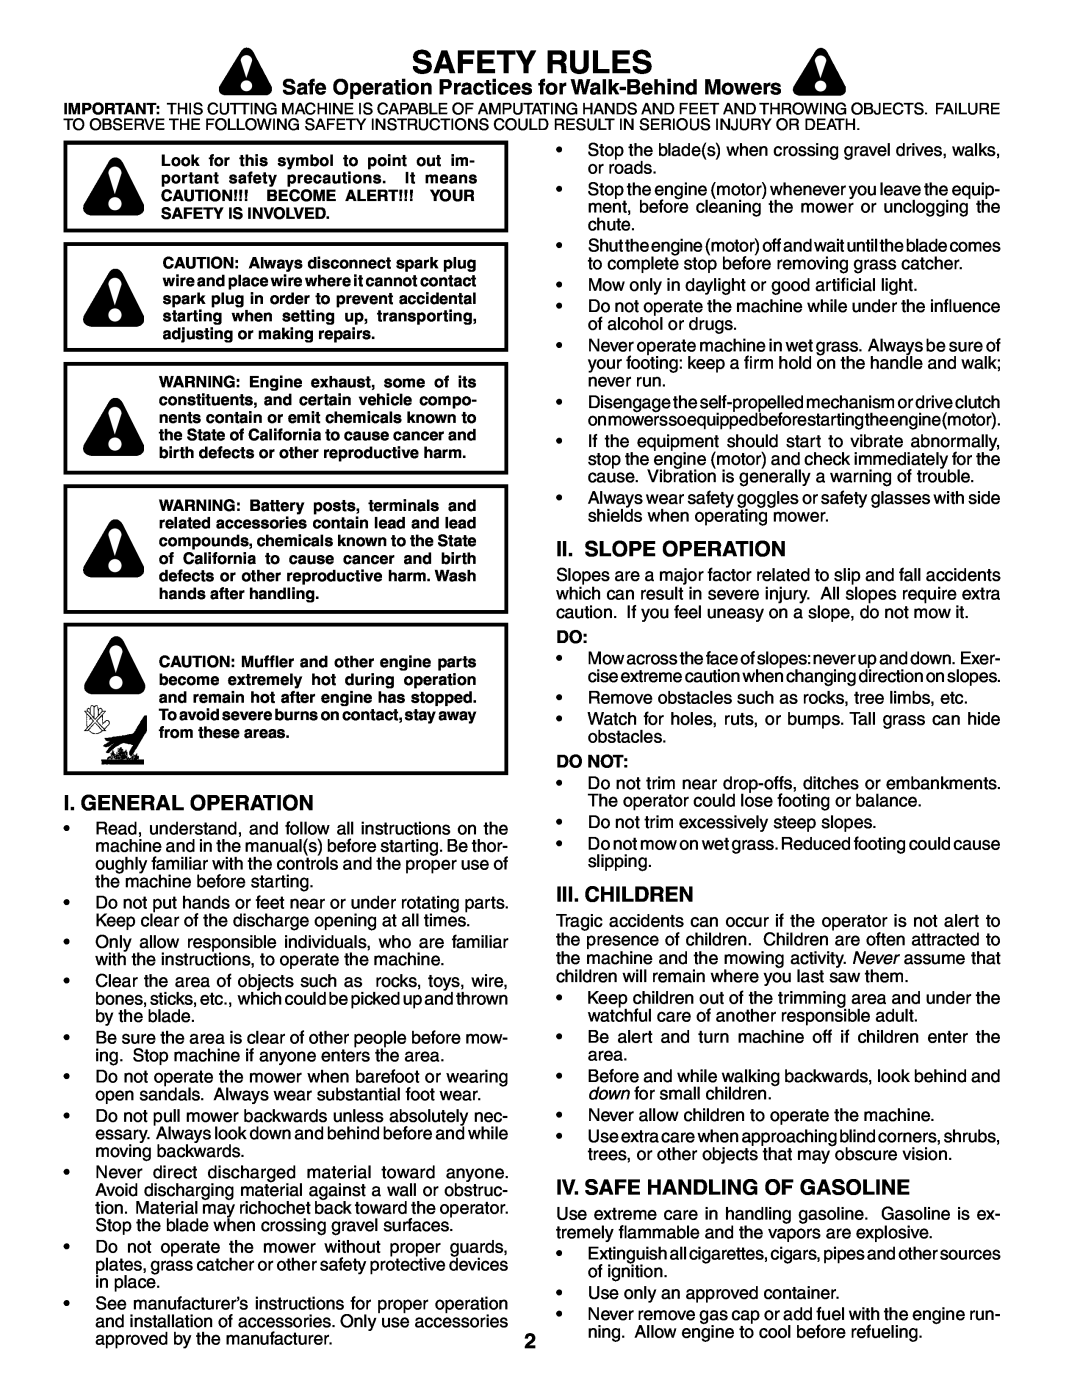 Husqvarna 917.375361 Safety Rules, Safe Operation Practices for Walk-Behind Mowers, Ii. Slope Operation, Iii. Children 